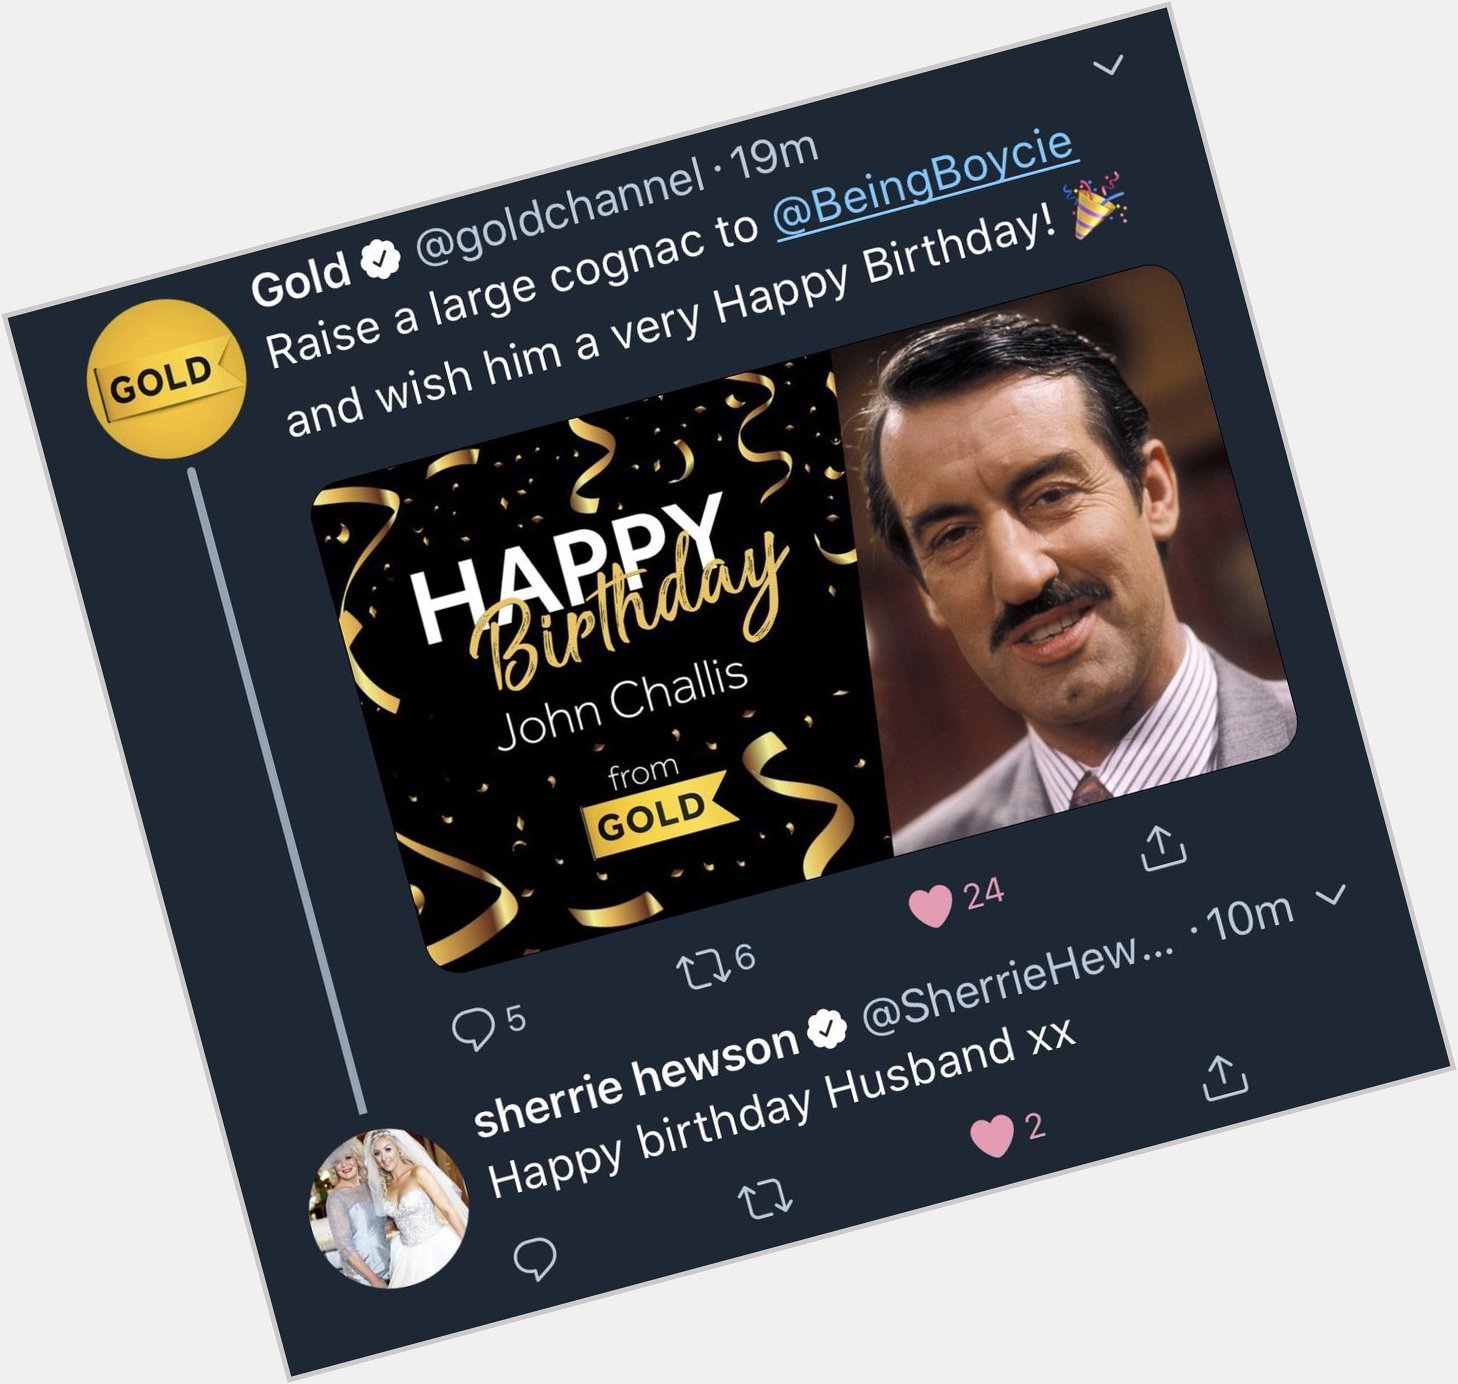 A very happy birthday to John Challis Hope you have a wonderful day John! 